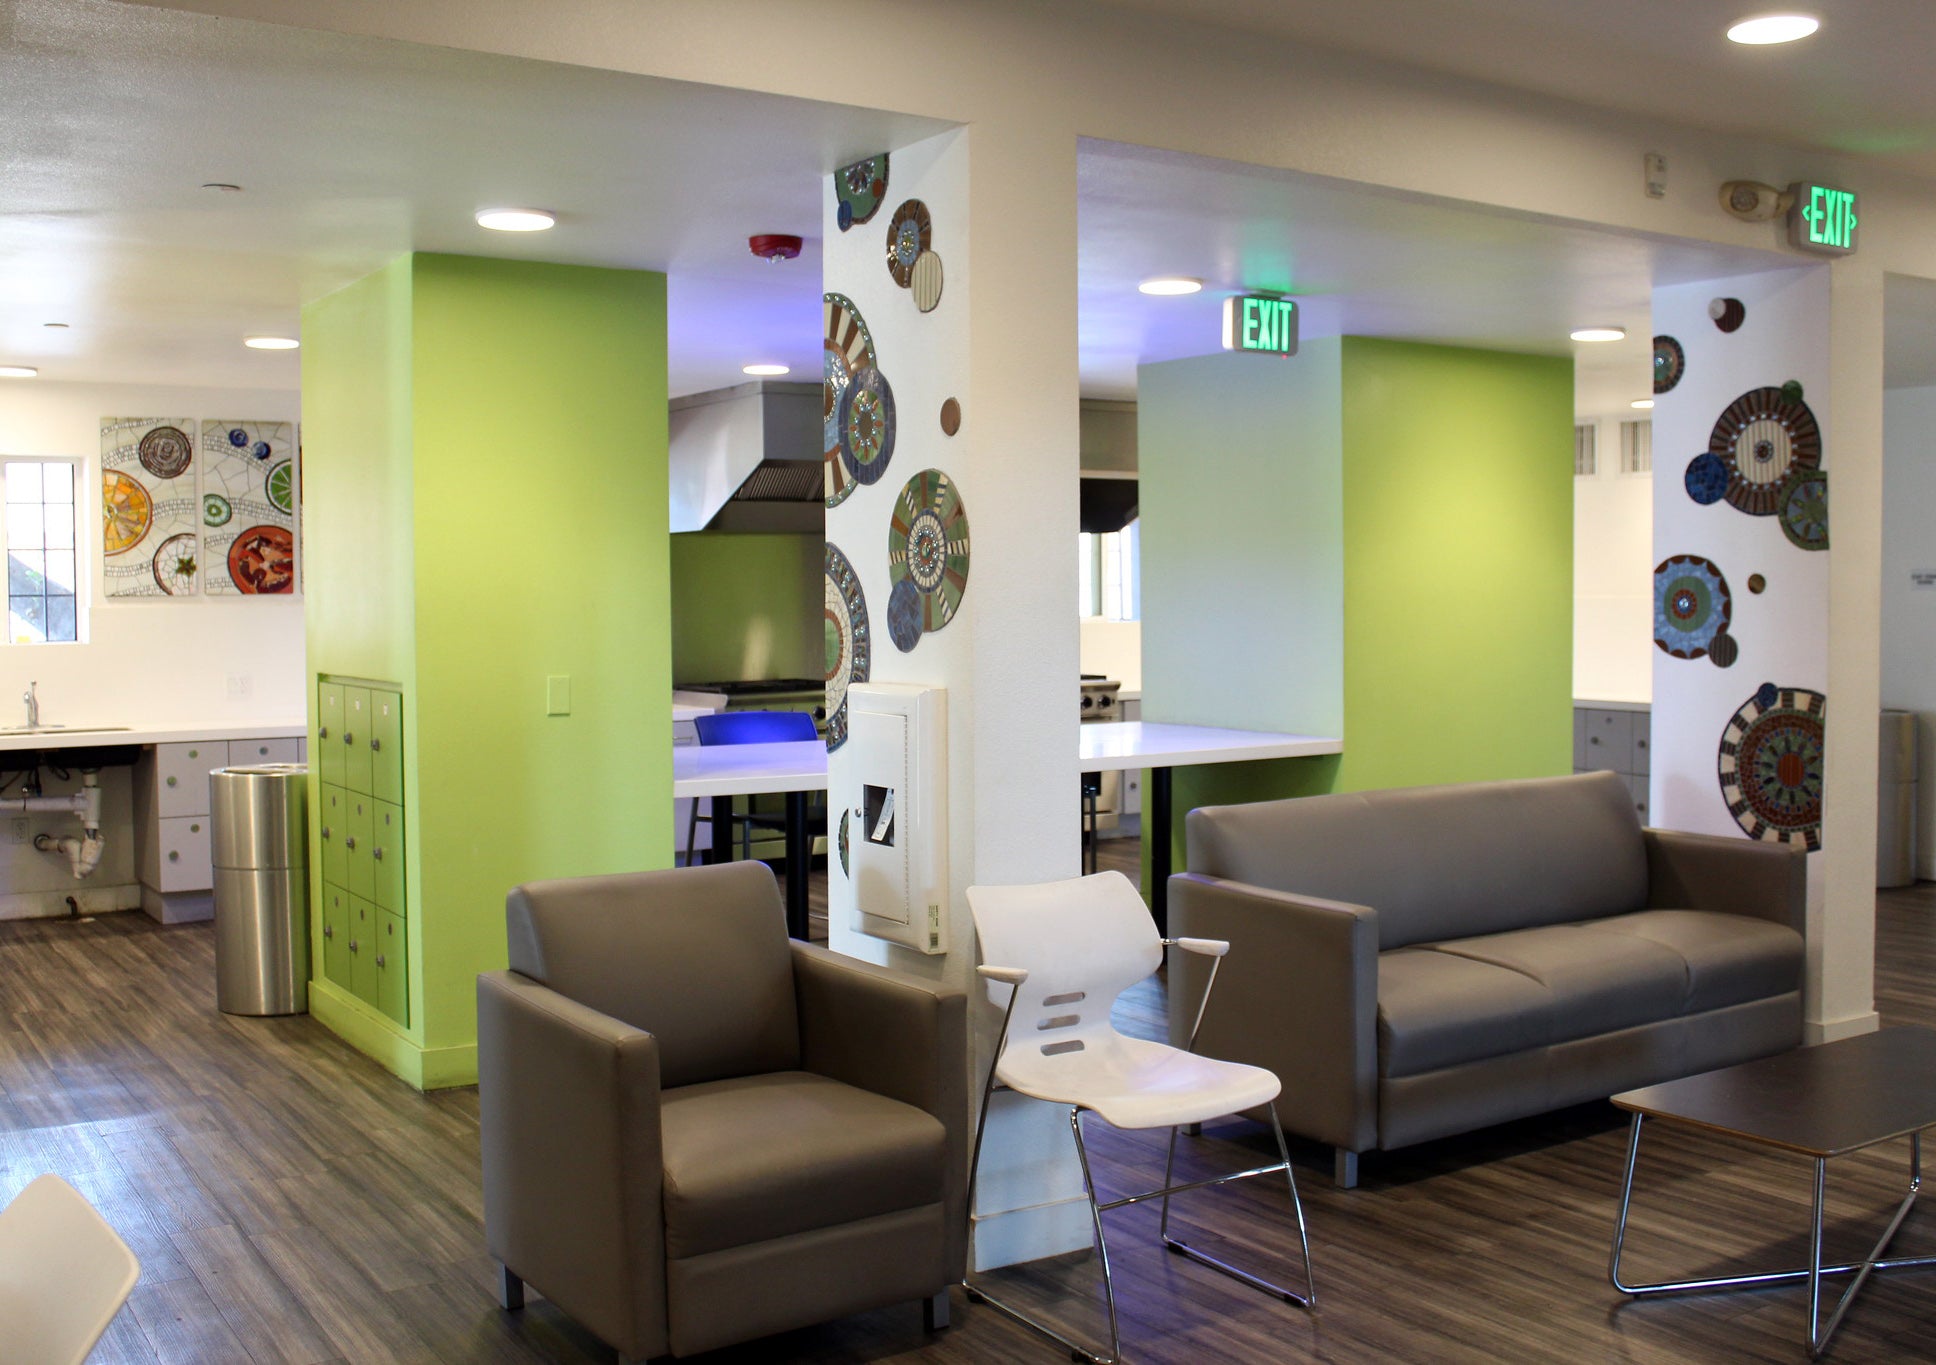 An apartment lobby with green walls, couches, and white pillars filled with circular mosaics.